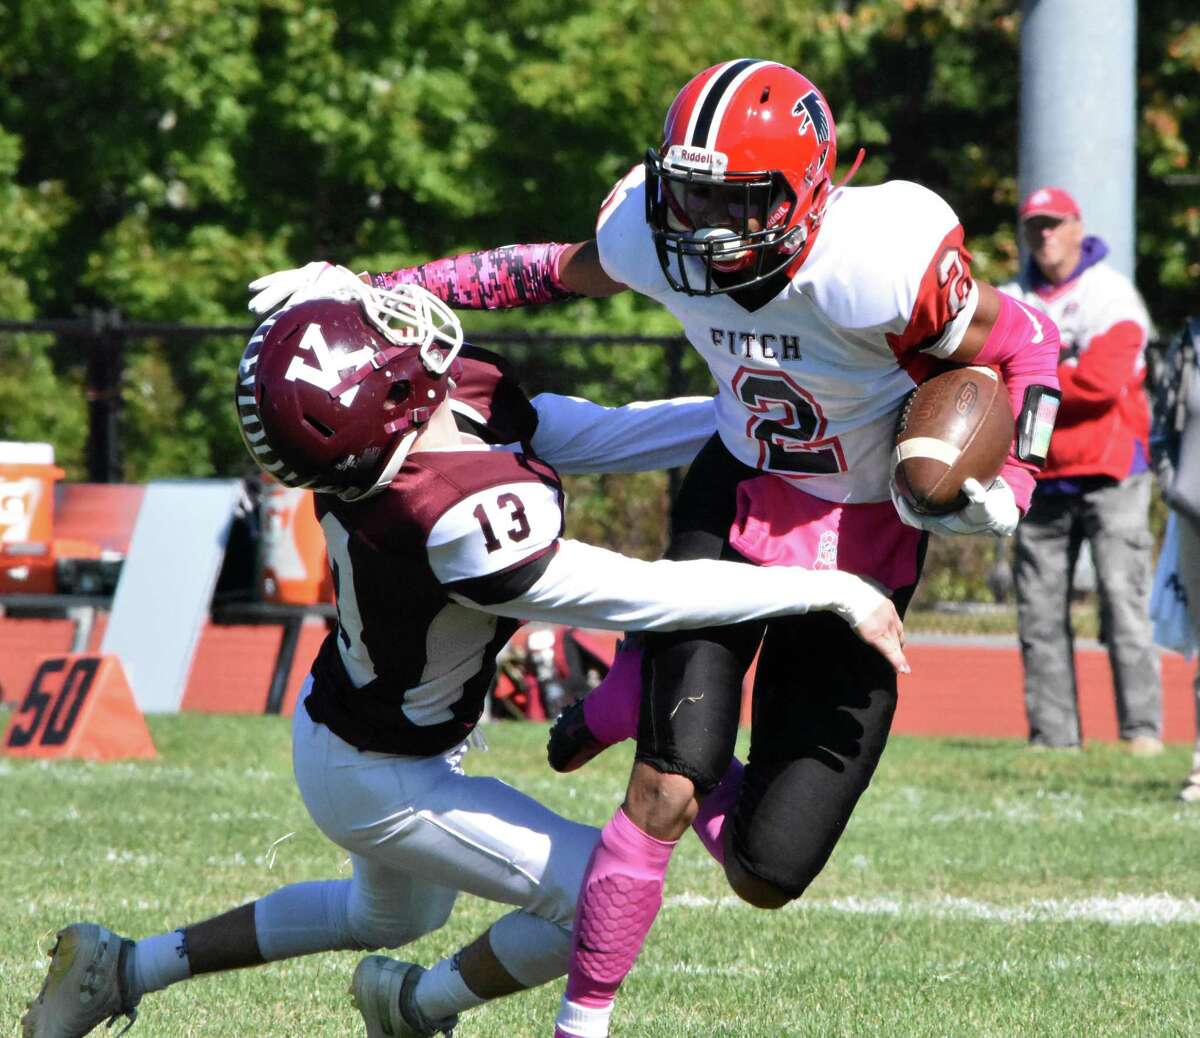 Fitch’s Lashier Edwards stiff arms Killingly’s Cooper Morissette at Killingly high school on Saturday, Oct. 5, 2019. (Pete Paguaga, Hearst Connecticut Media)